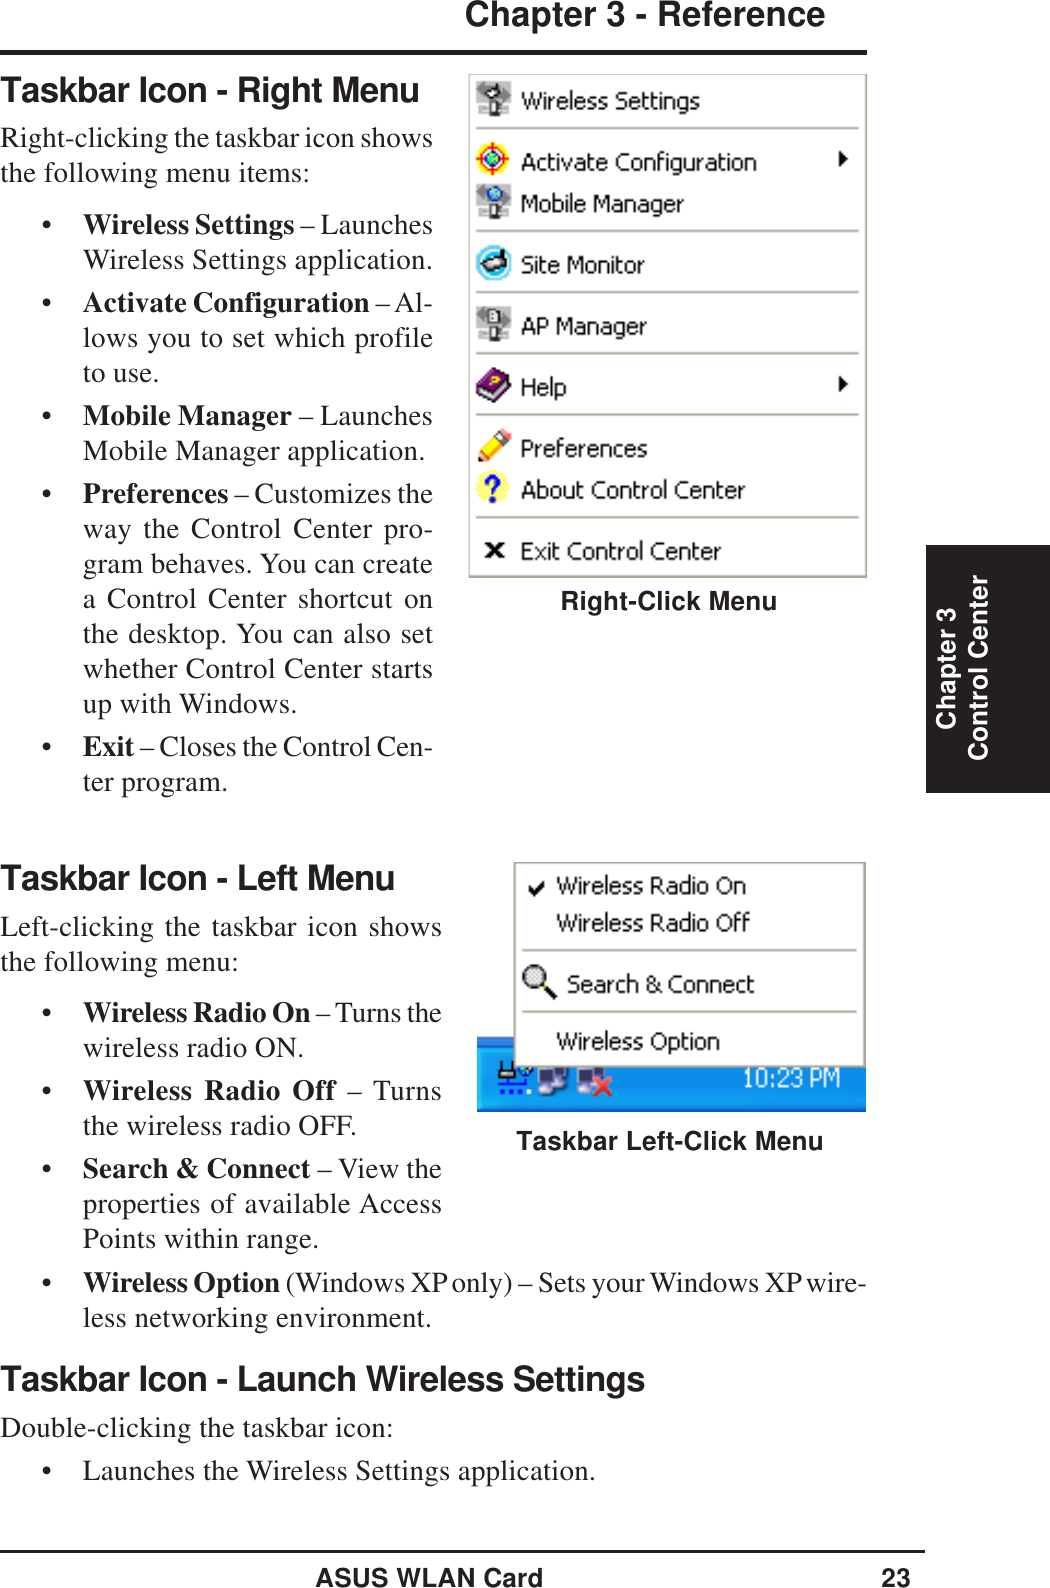 ASUS WLAN Card 23Chapter 3 - ReferenceChapter 3Control CenterTaskbar Icon - Left MenuLeft-clicking the taskbar icon showsthe following menu:•Wireless Radio On – Turns thewireless radio ON.•Wireless Radio Off – Turnsthe wireless radio OFF.•Search &amp; Connect – View theproperties of available AccessPoints within range.•Wireless Option (Windows XP only) – Sets your Windows XP wire-less networking environment.Taskbar Icon - Launch Wireless SettingsDouble-clicking the taskbar icon:• Launches the Wireless Settings application.Taskbar Left-Click MenuTaskbar Icon - Right MenuRight-clicking the taskbar icon showsthe following menu items:•Wireless Settings – LaunchesWireless Settings application.•Activate Configuration – Al-lows you to set which profileto use.•Mobile Manager – LaunchesMobile Manager application.•Preferences – Customizes theway the Control Center pro-gram behaves. You can createa Control Center shortcut onthe desktop. You can also setwhether Control Center startsup with Windows.•Exit – Closes the Control Cen-ter program.Right-Click Menu